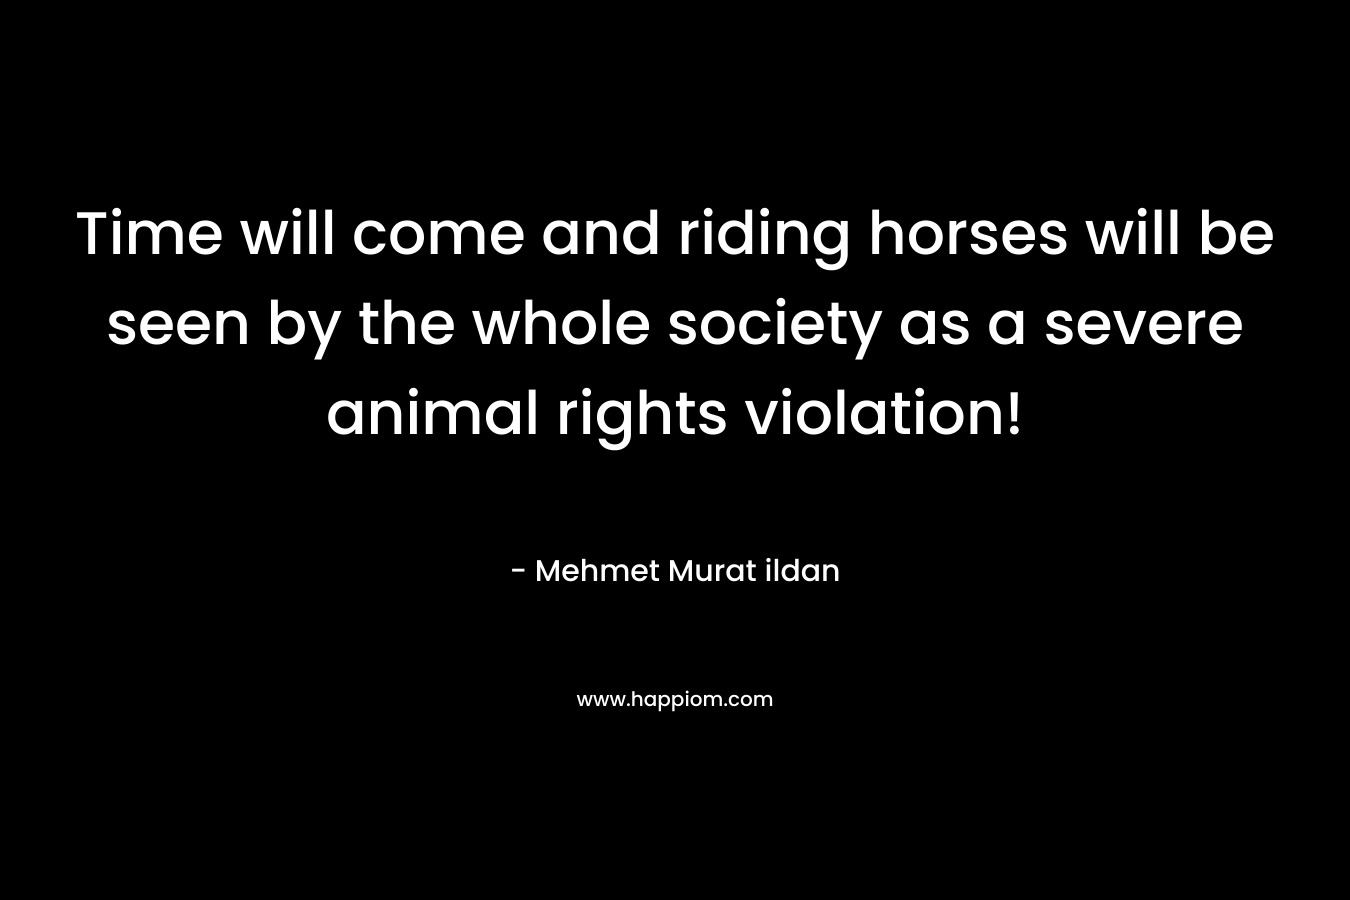 Time will come and riding horses will be seen by the whole society as a severe animal rights violation! – Mehmet Murat ildan